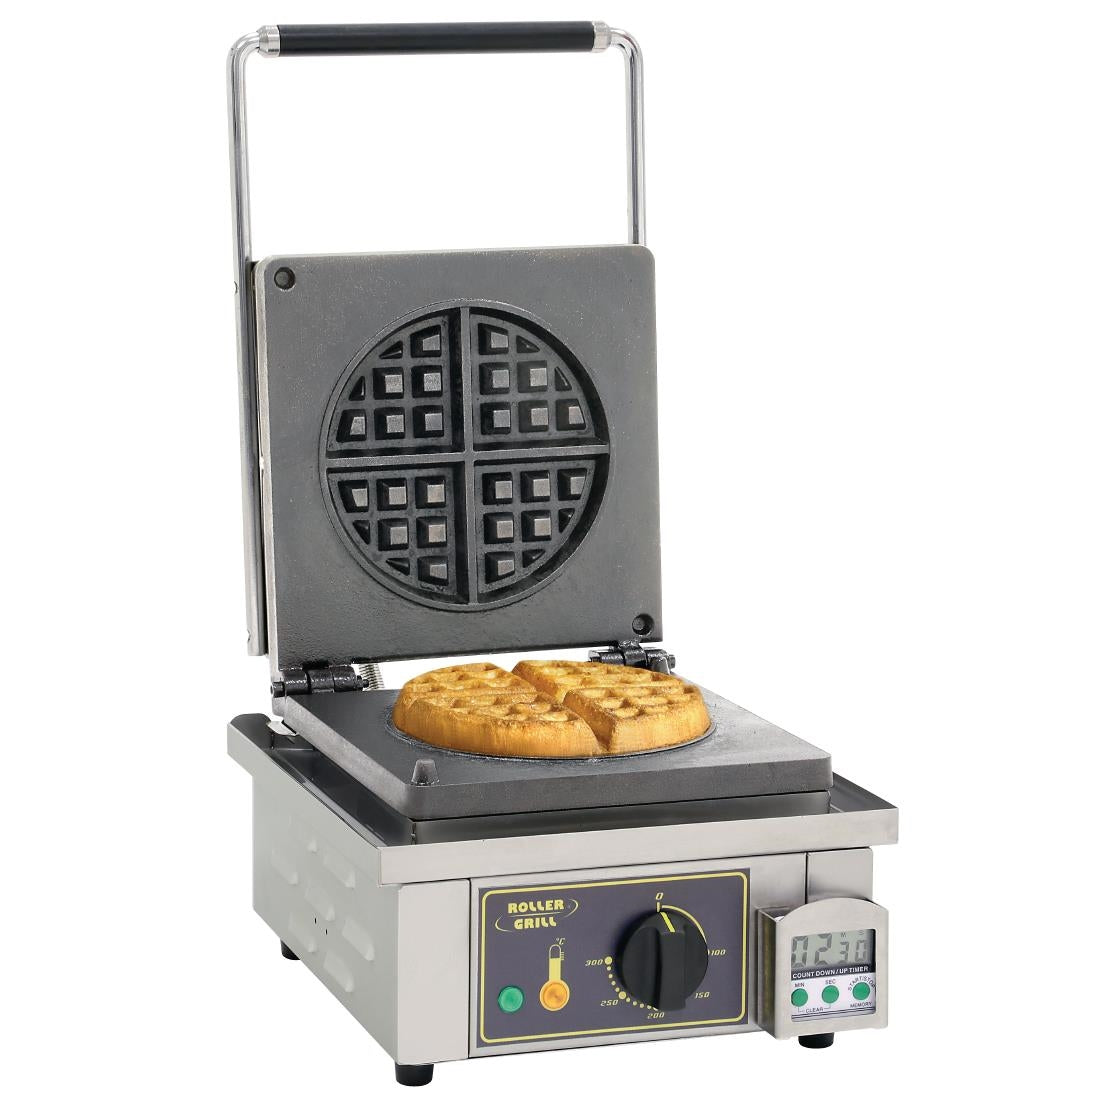 GP310 Roller Grill Round Waffle Maker GES75